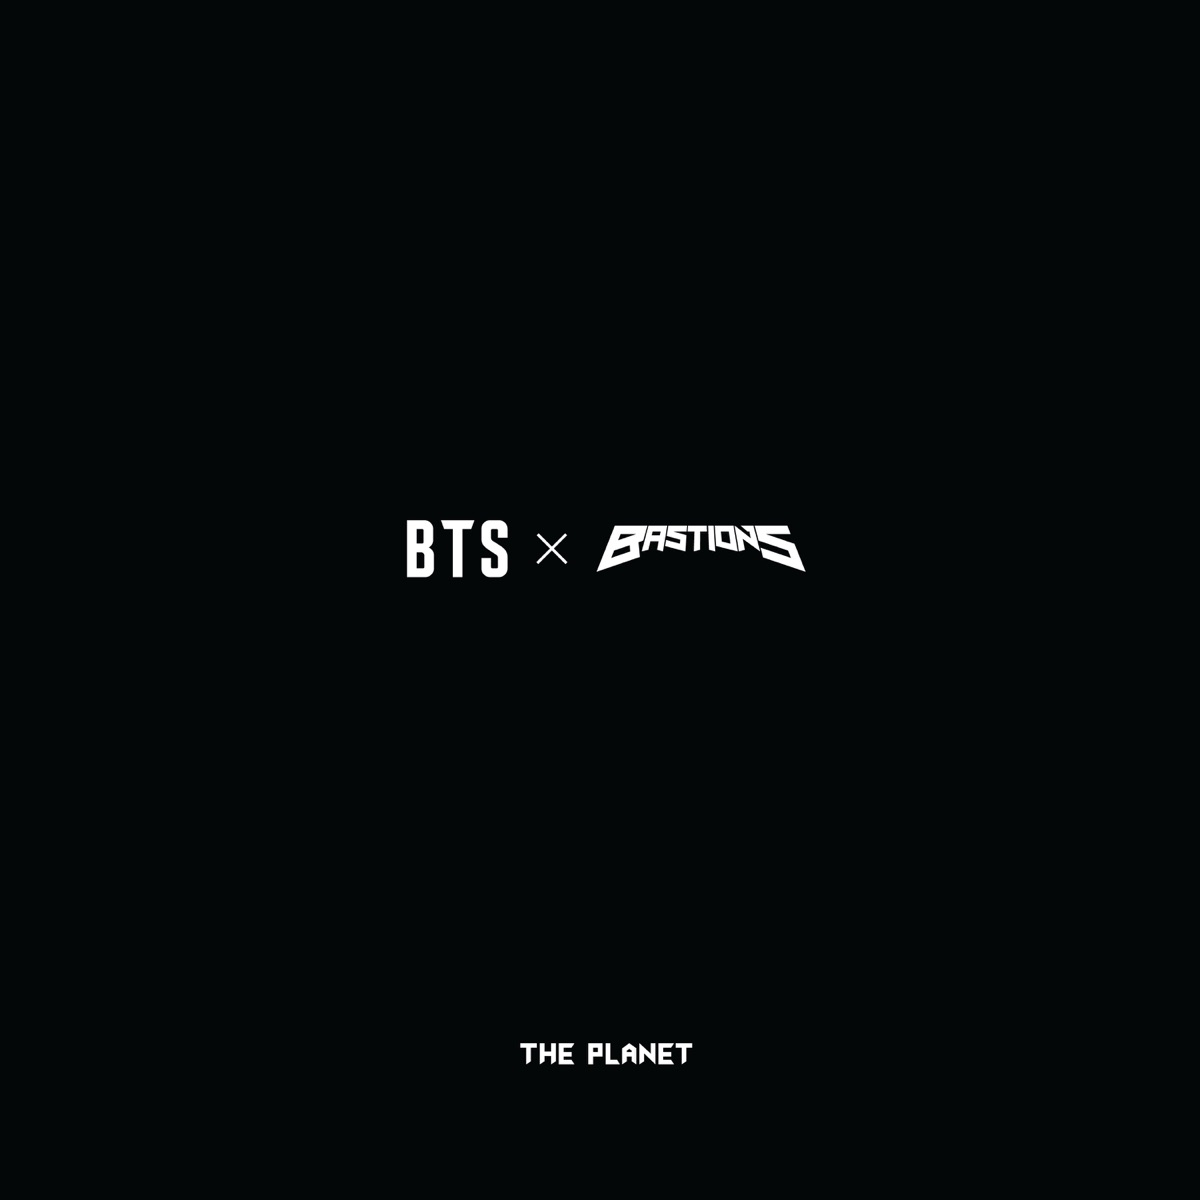 Cover art for『BTS - The Planet』from the release『The Planet』